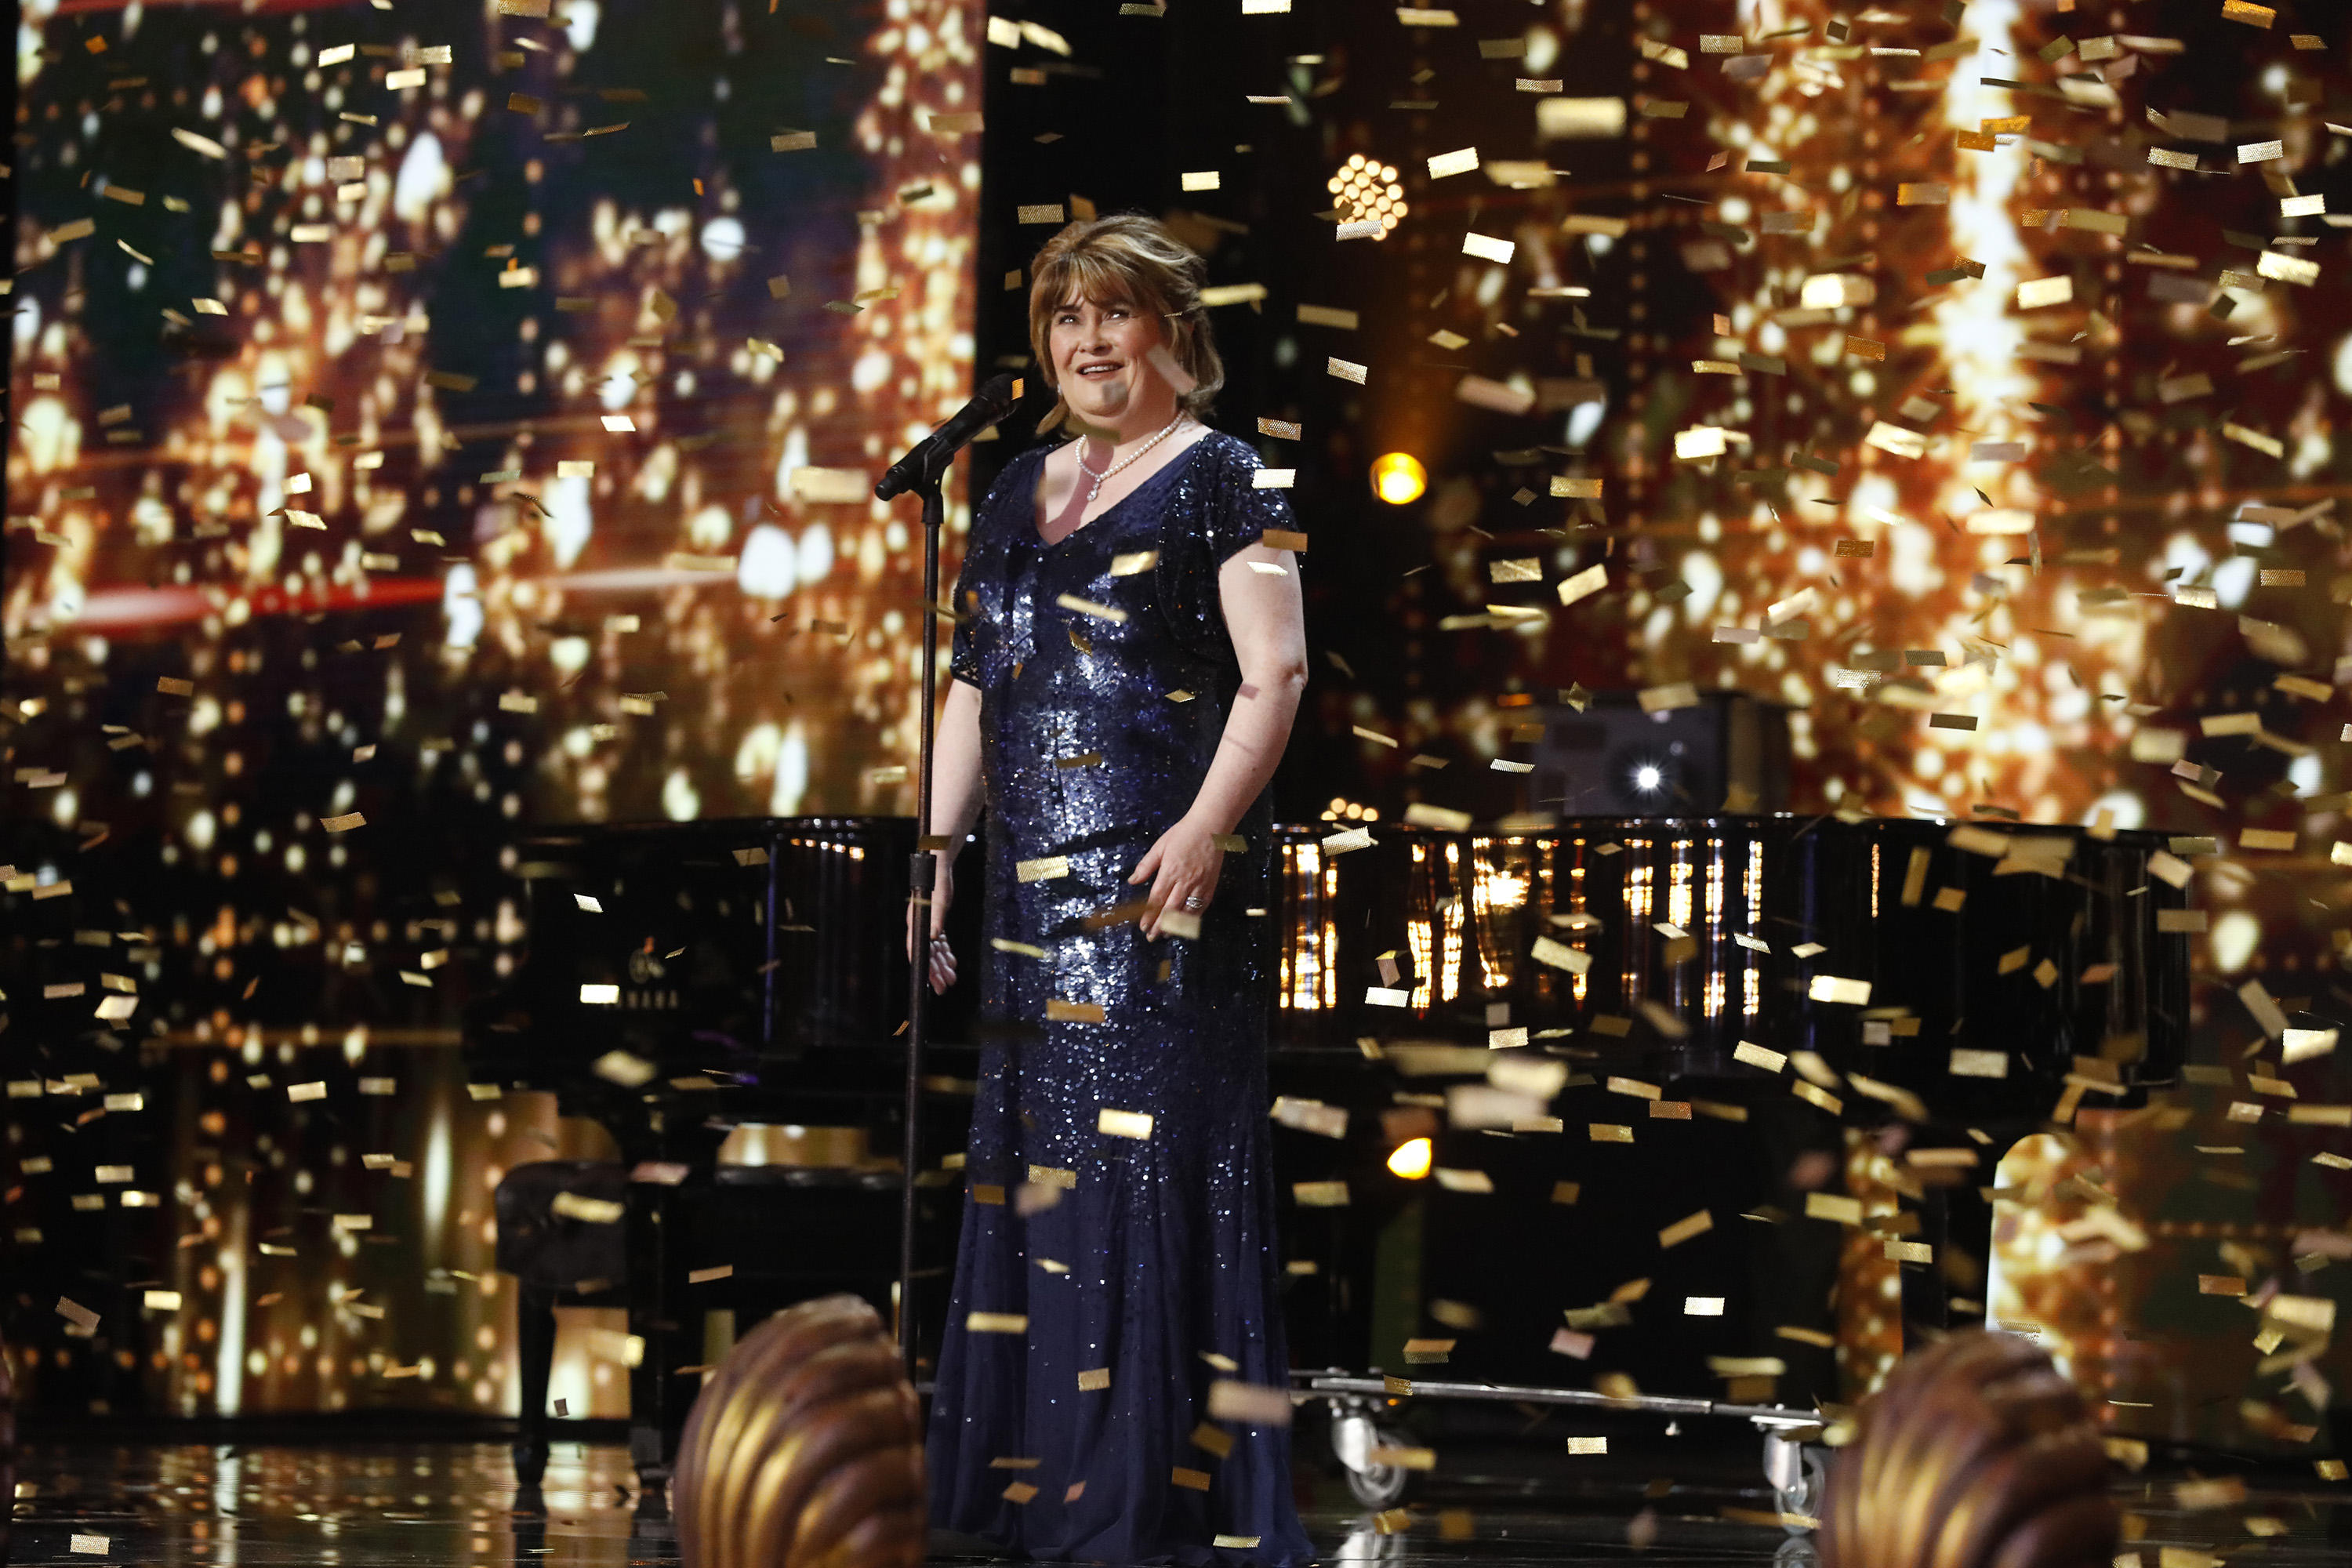 Susan Boyle attends "America’s Got Talent" Season 1 on September 27, 2018 | Source: Getty Images